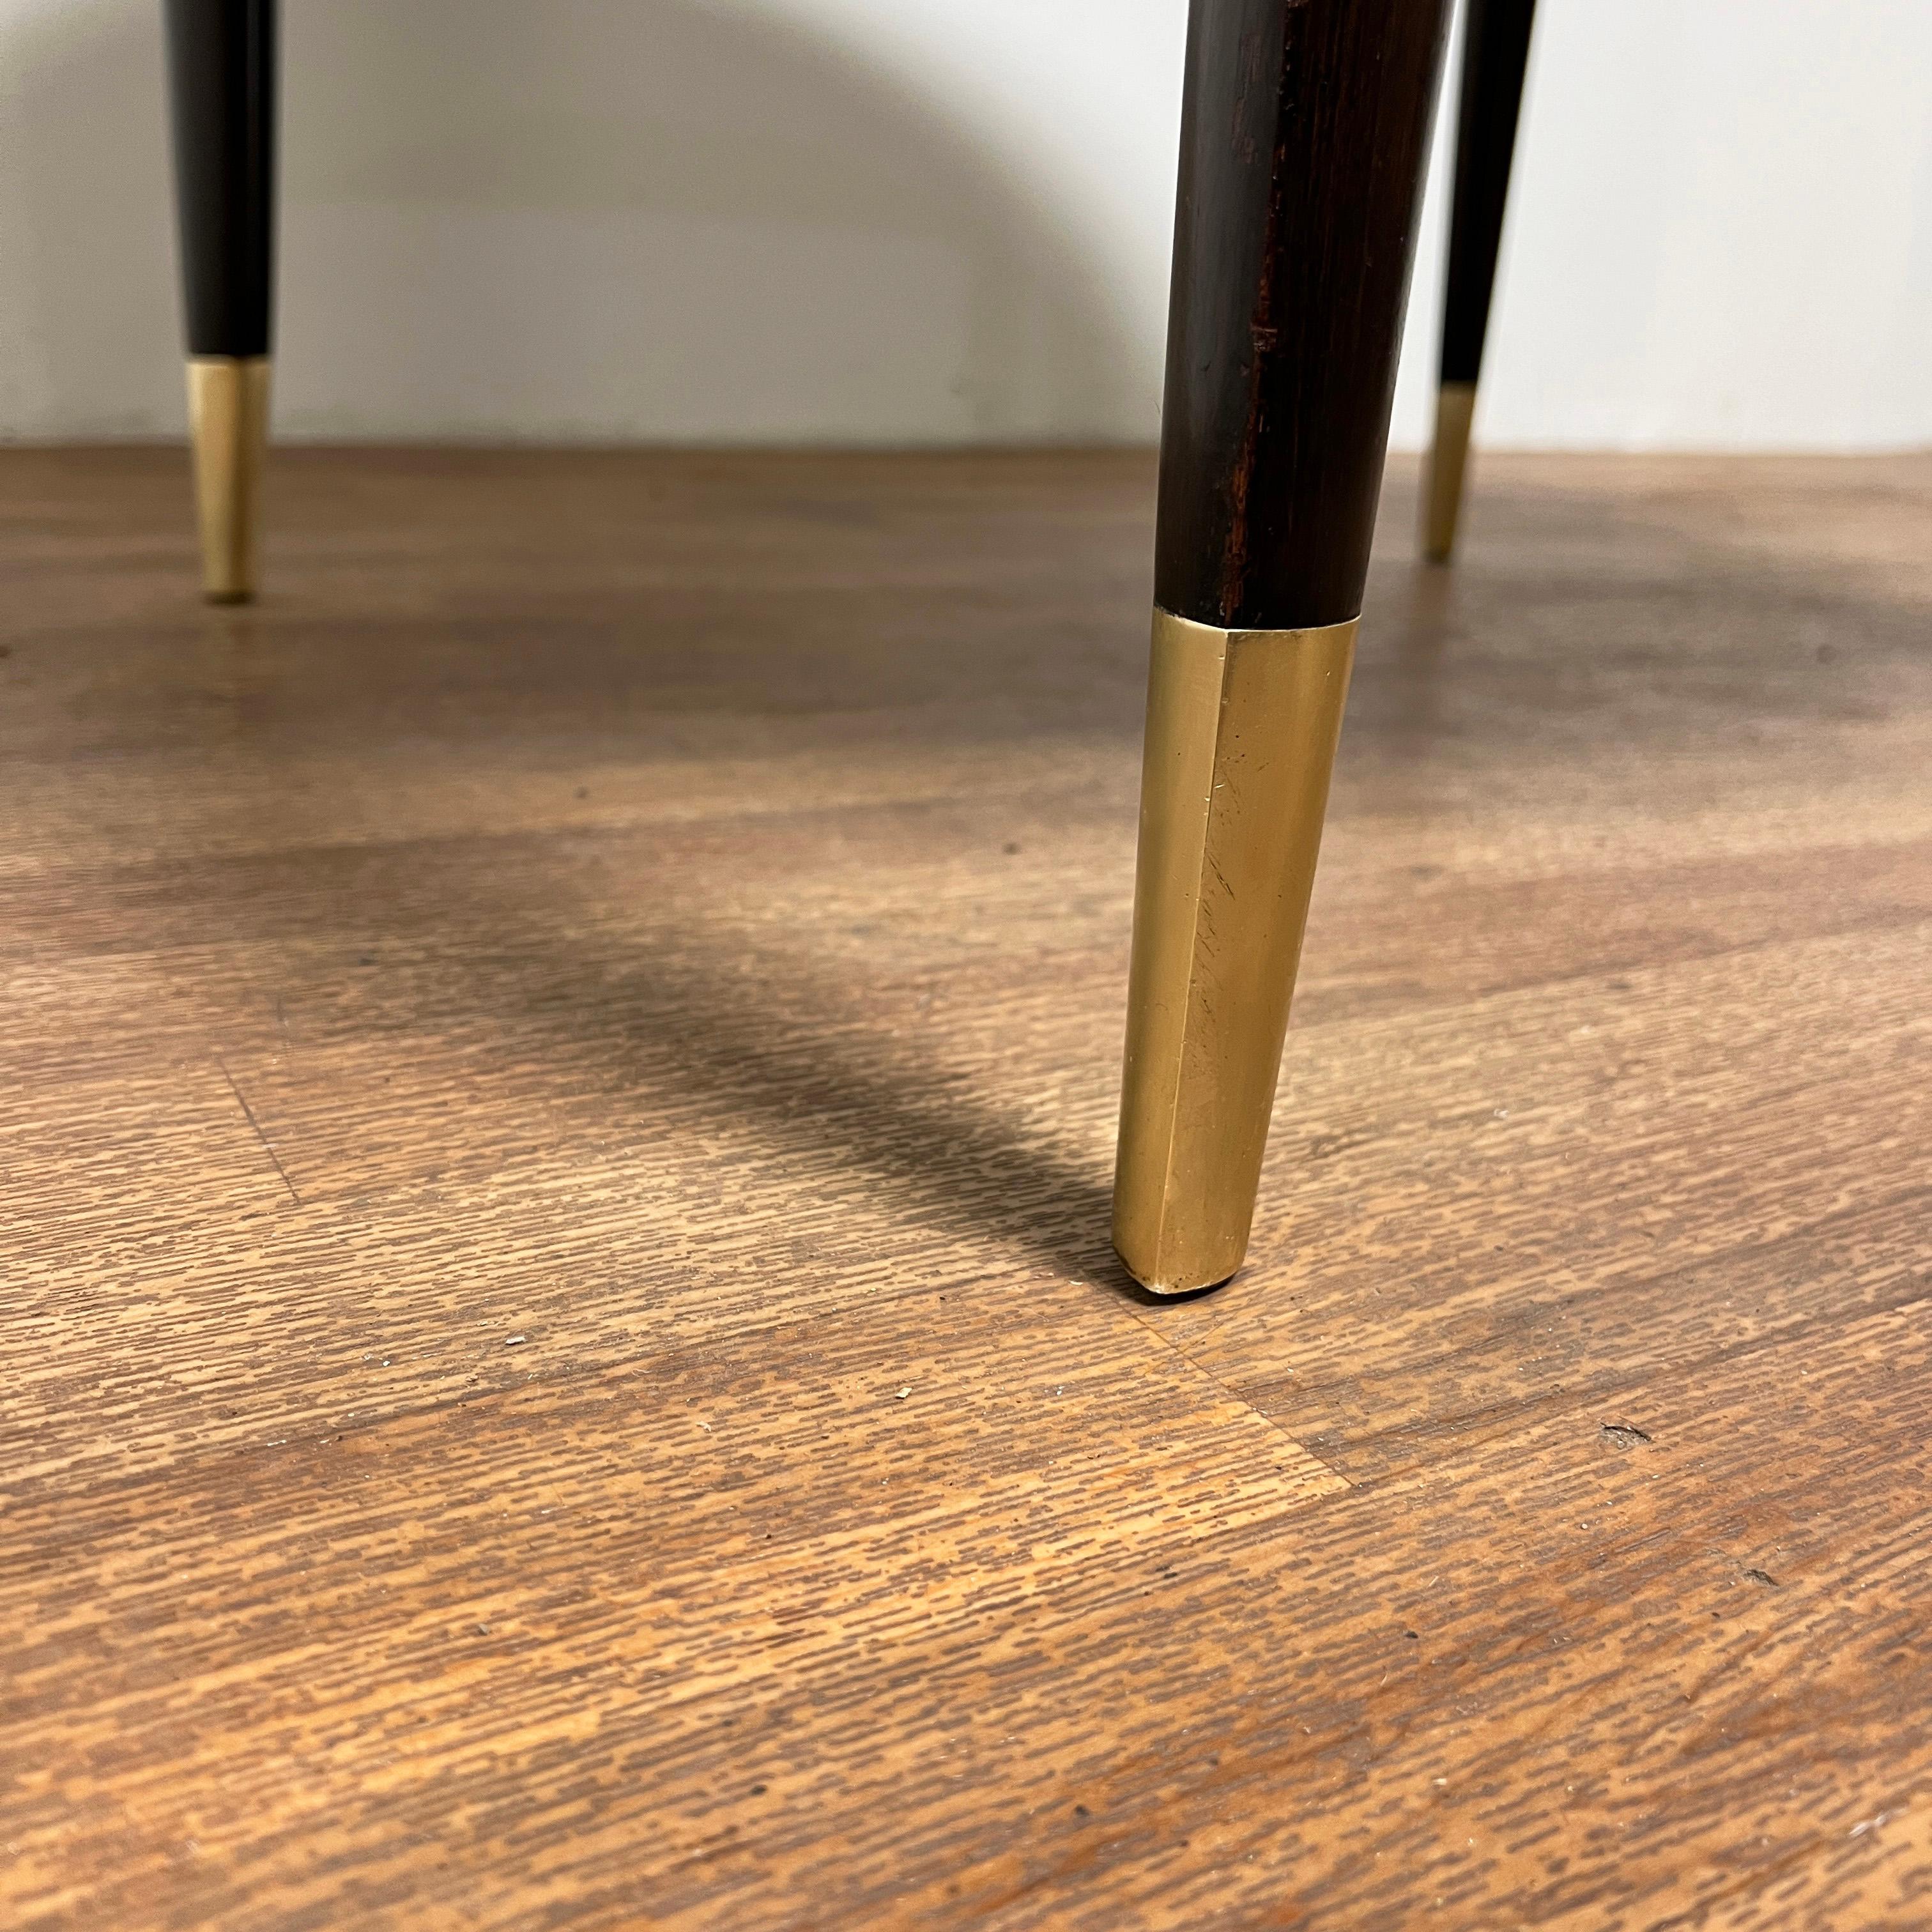 Gio Ponti for Singer Dining Table in Walnut With Brass Sabots Circa 1950s For Sale 1